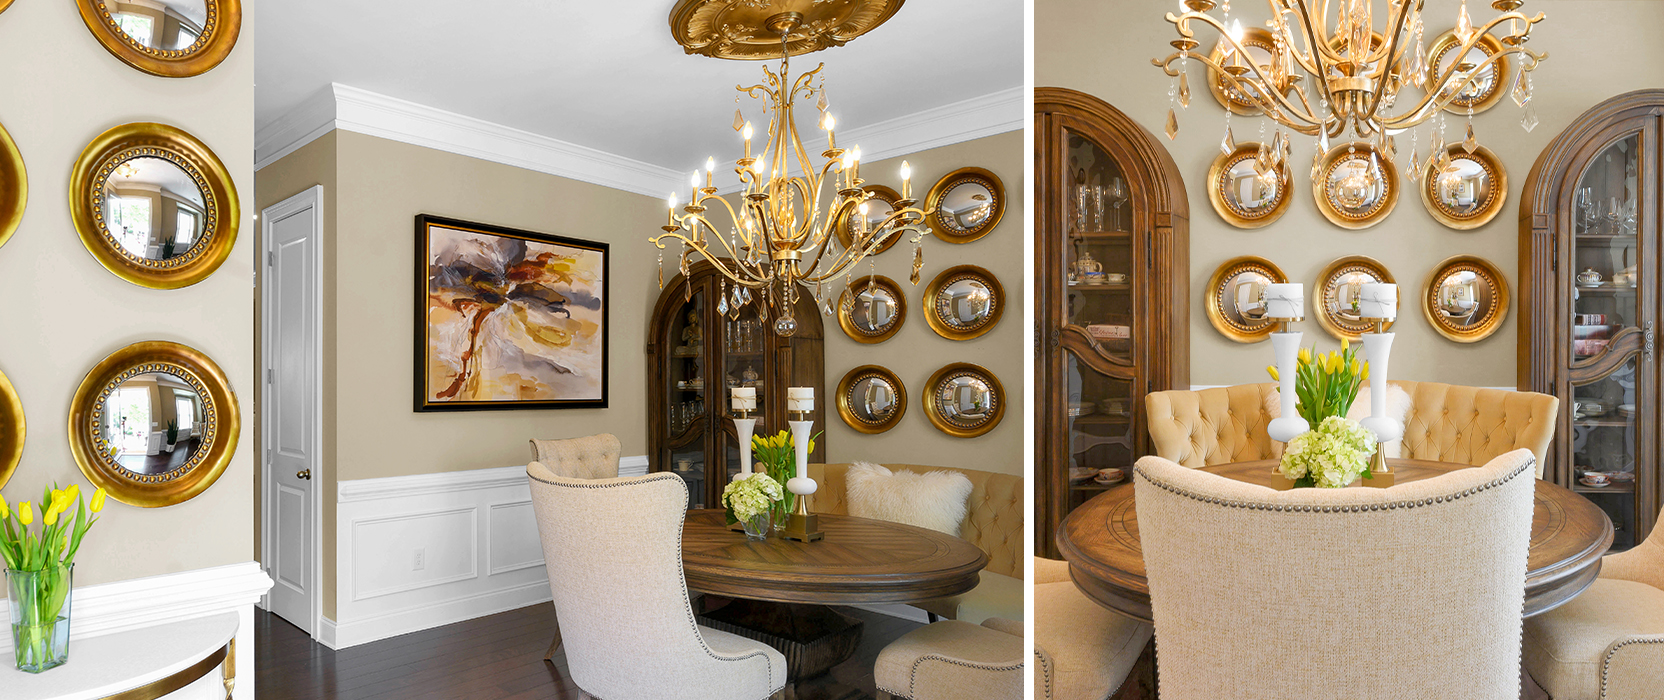 Opulent but cozy dining room with round table and tufted upholstered chairs, gold-framed mirror plate wall decor, neutral walls with white wainscoting, and gold chandelier.